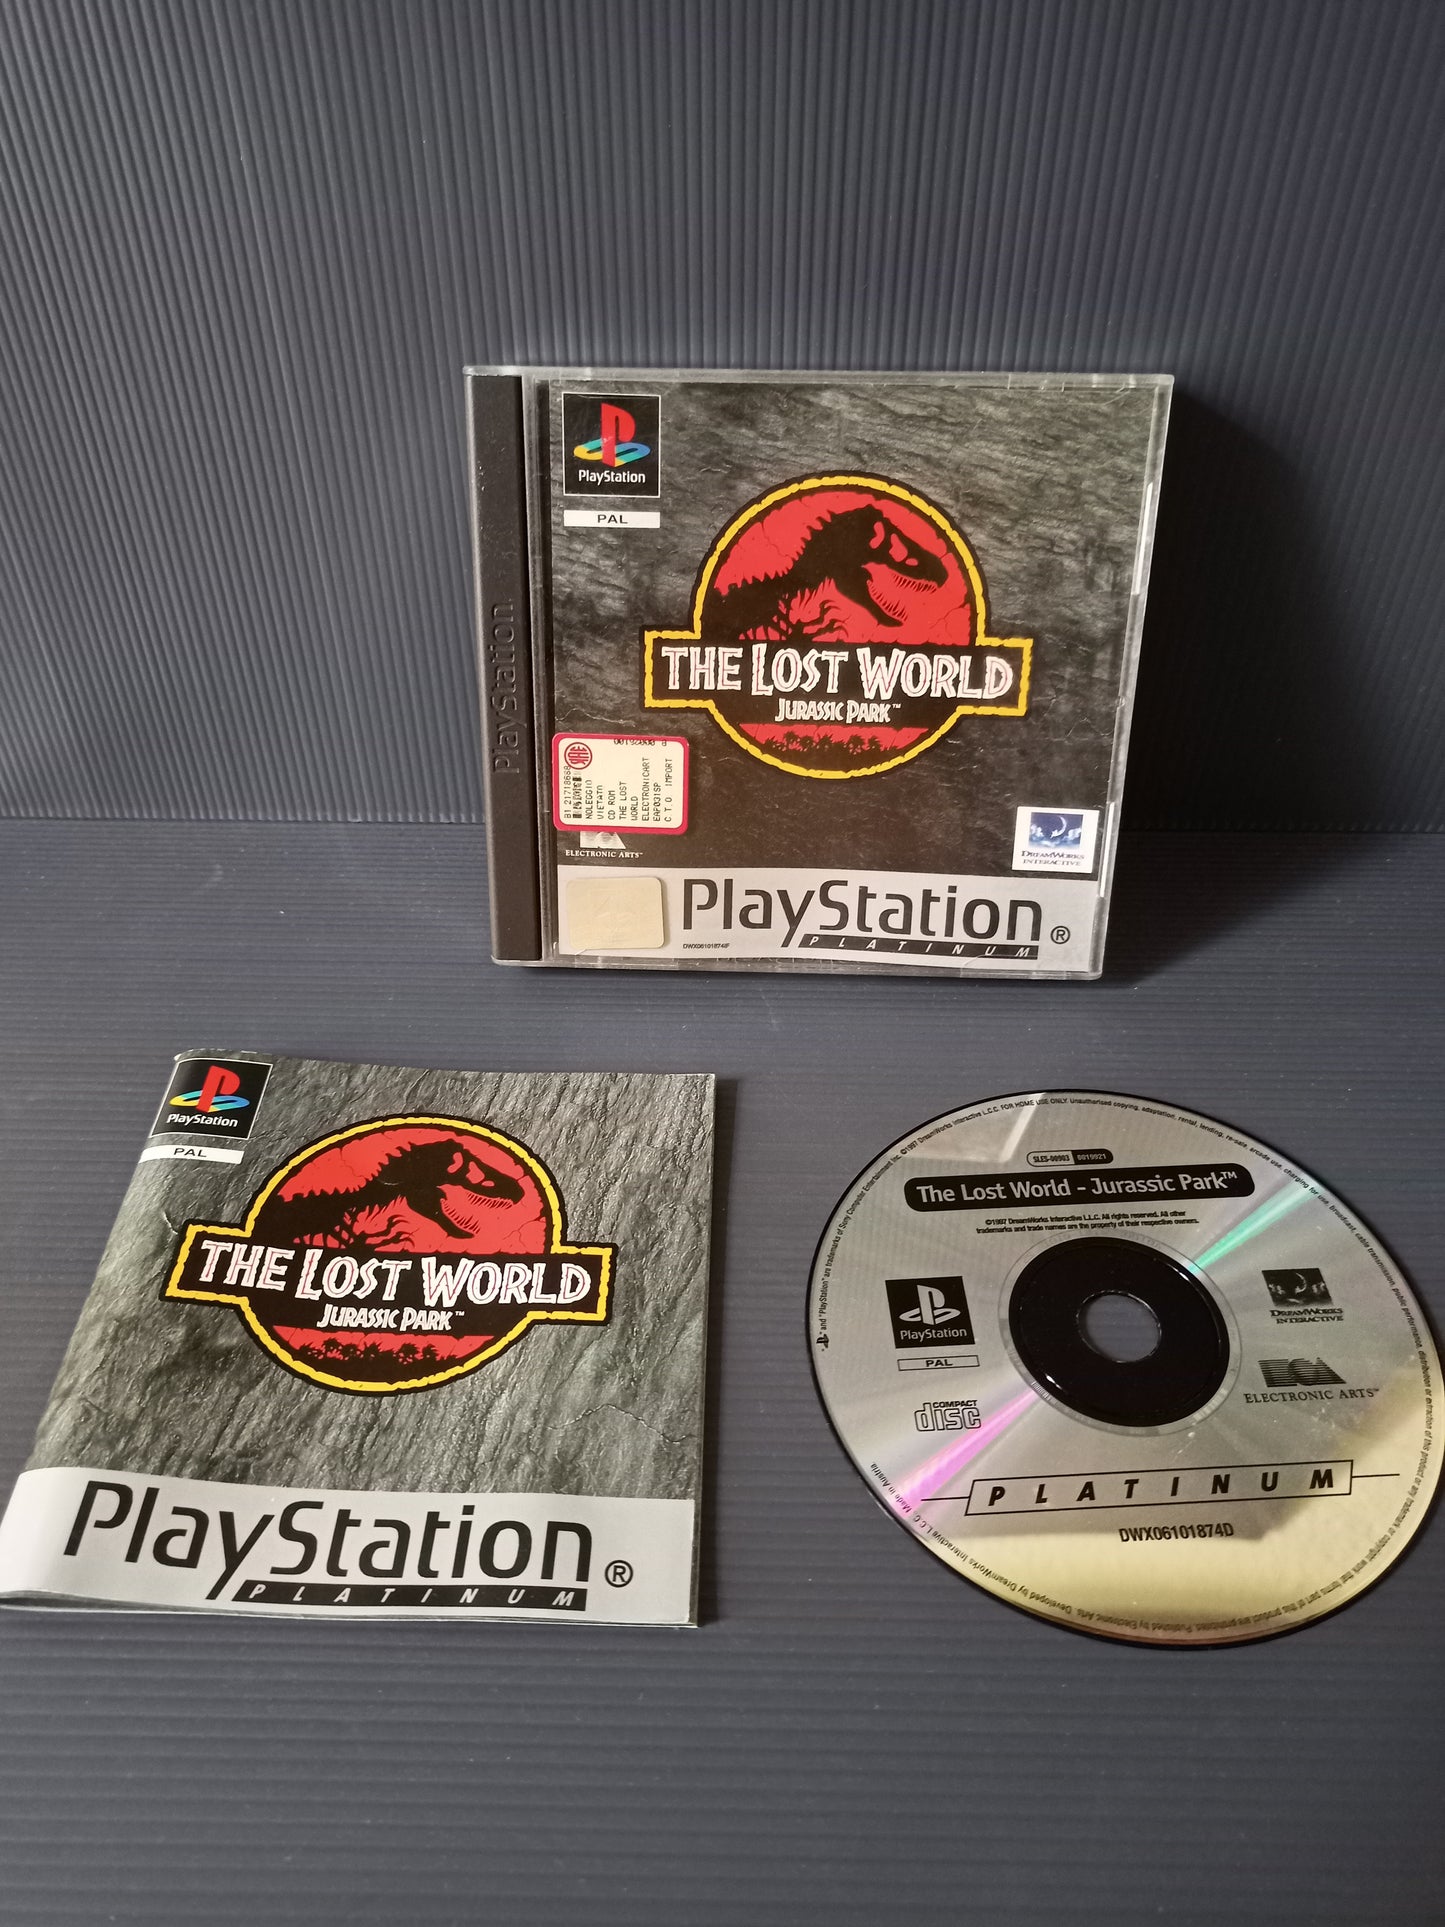 The Lost World Jurassic Park video game for PS1